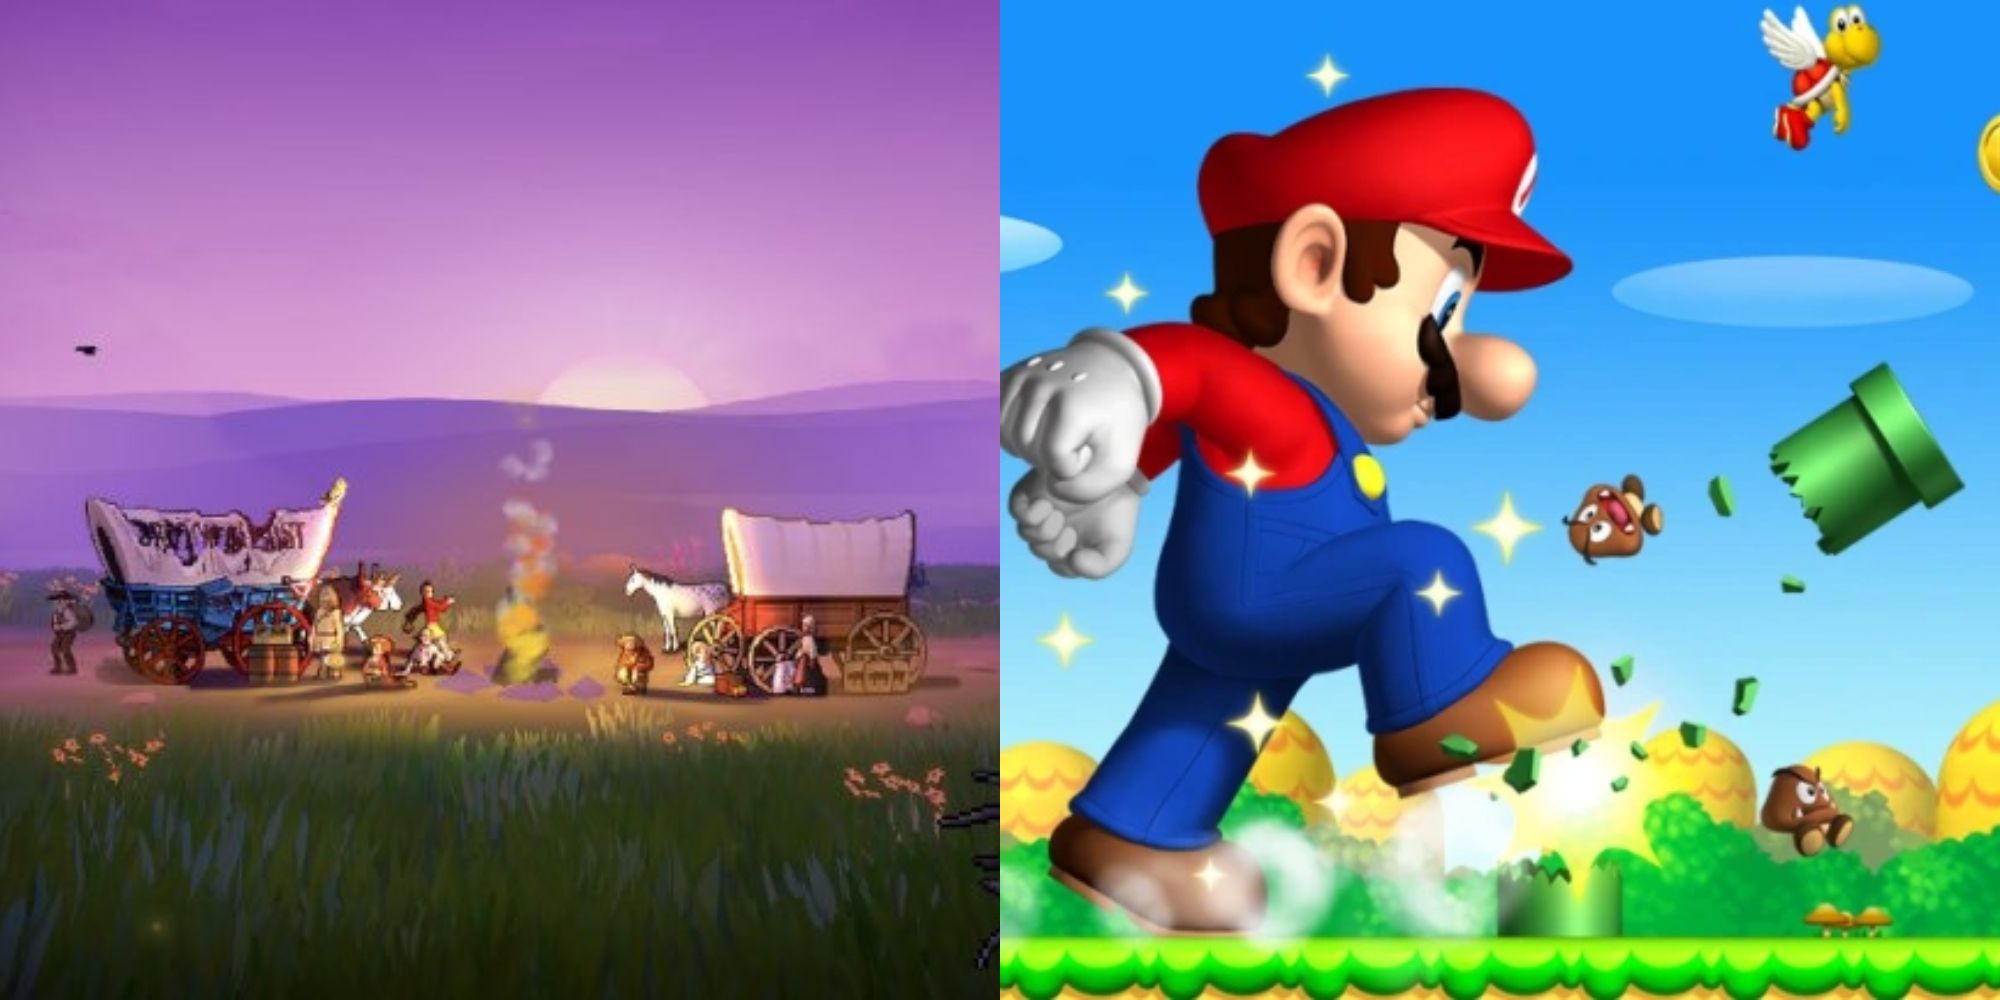 Promo images for The Oregan Trail and Super Mario